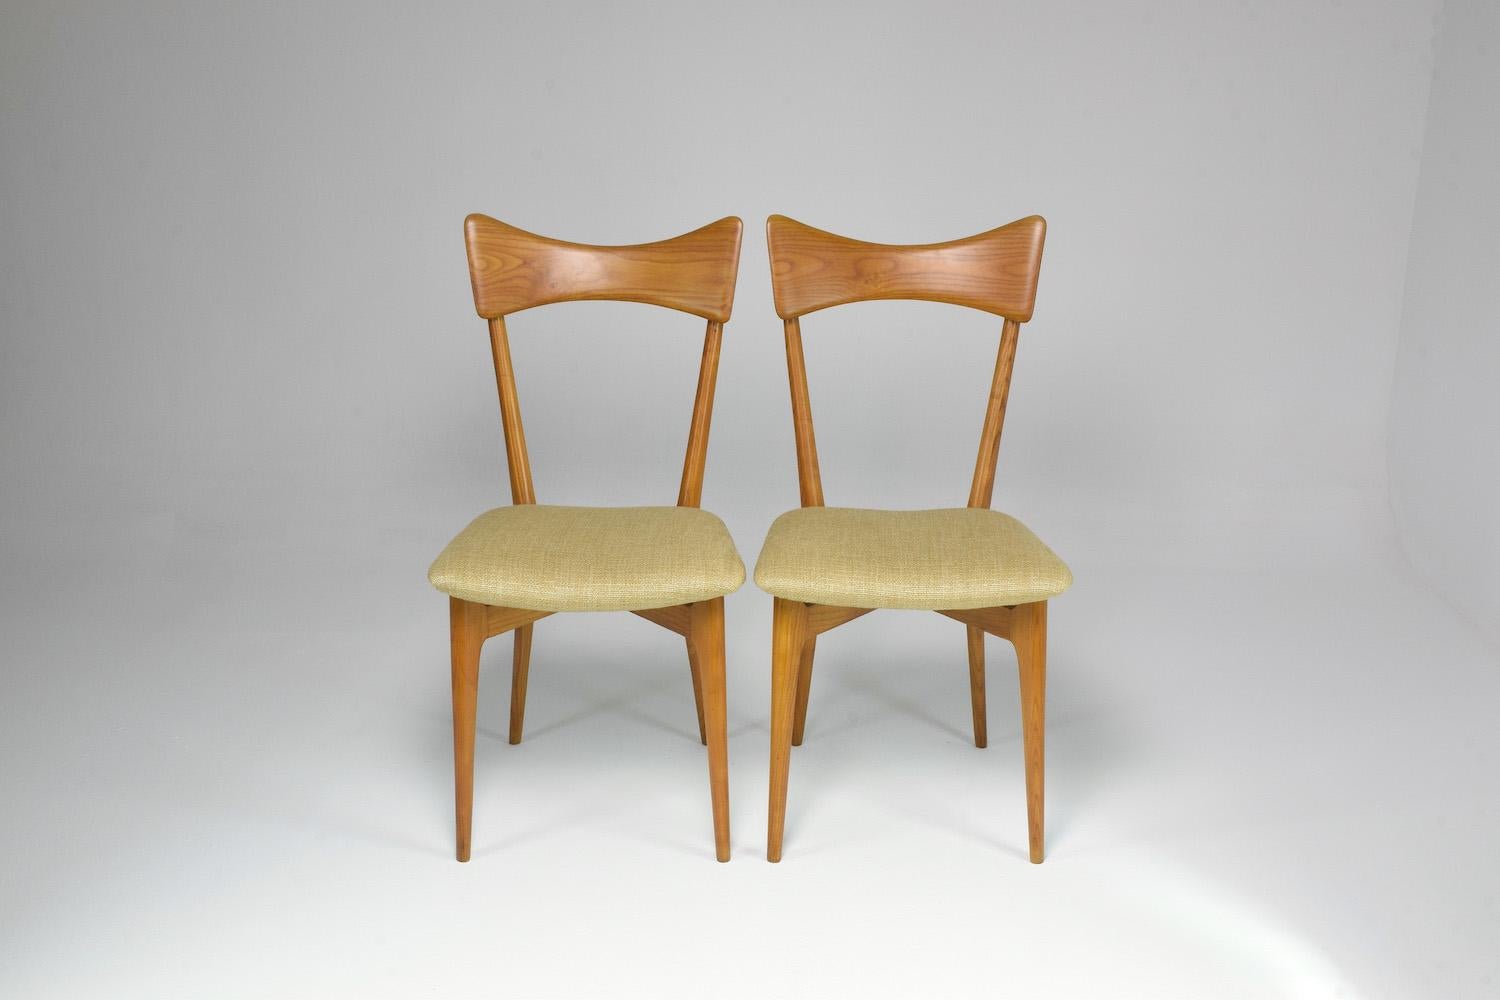 Mid-Century Modern 1950's Italian Chairs by Ico and Luisa Parisi for Ariberto Colombo, Set of Two